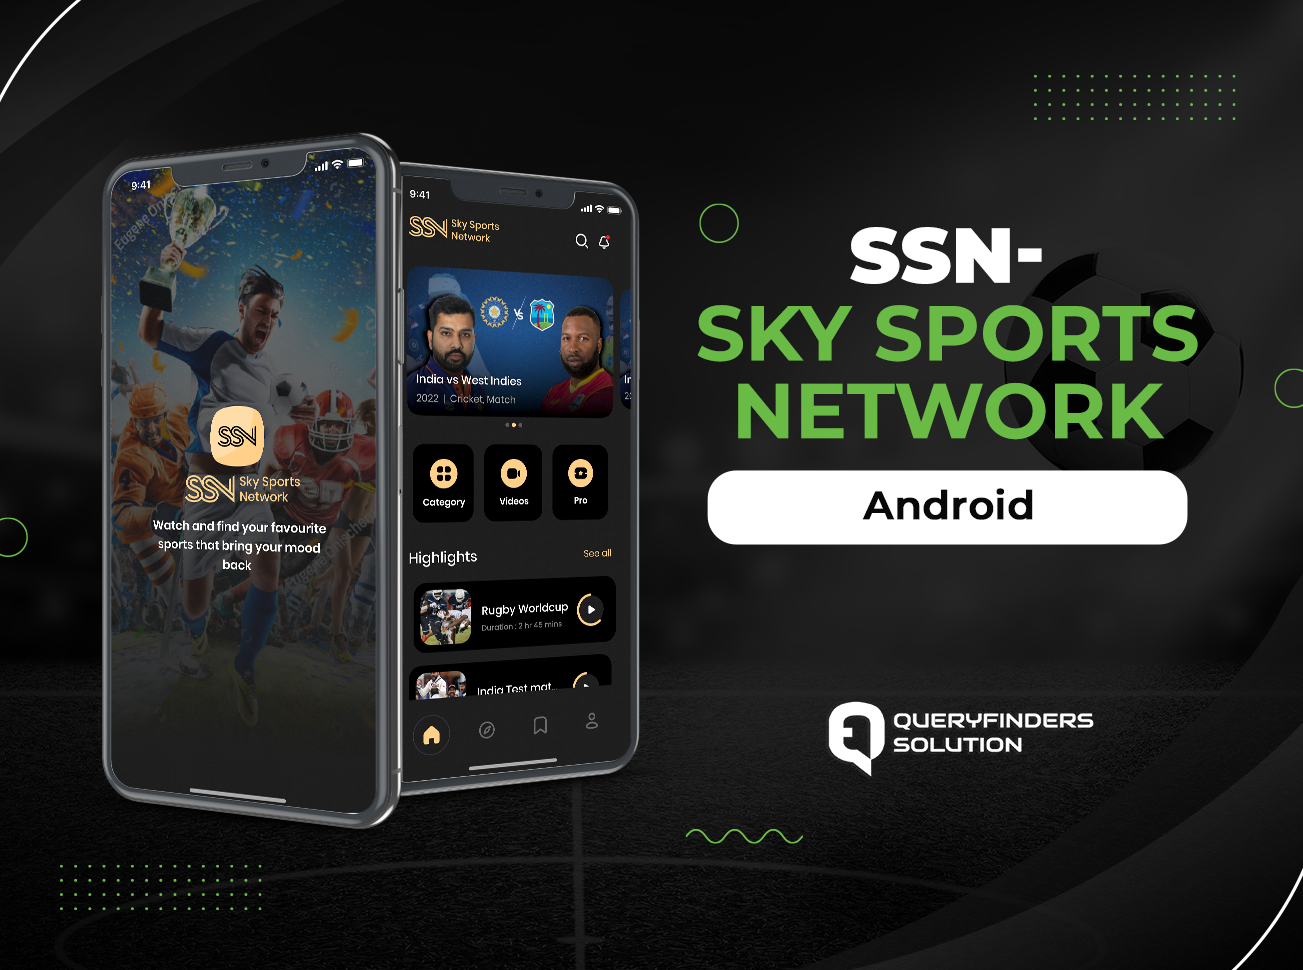 SSN- Sky Sports Network